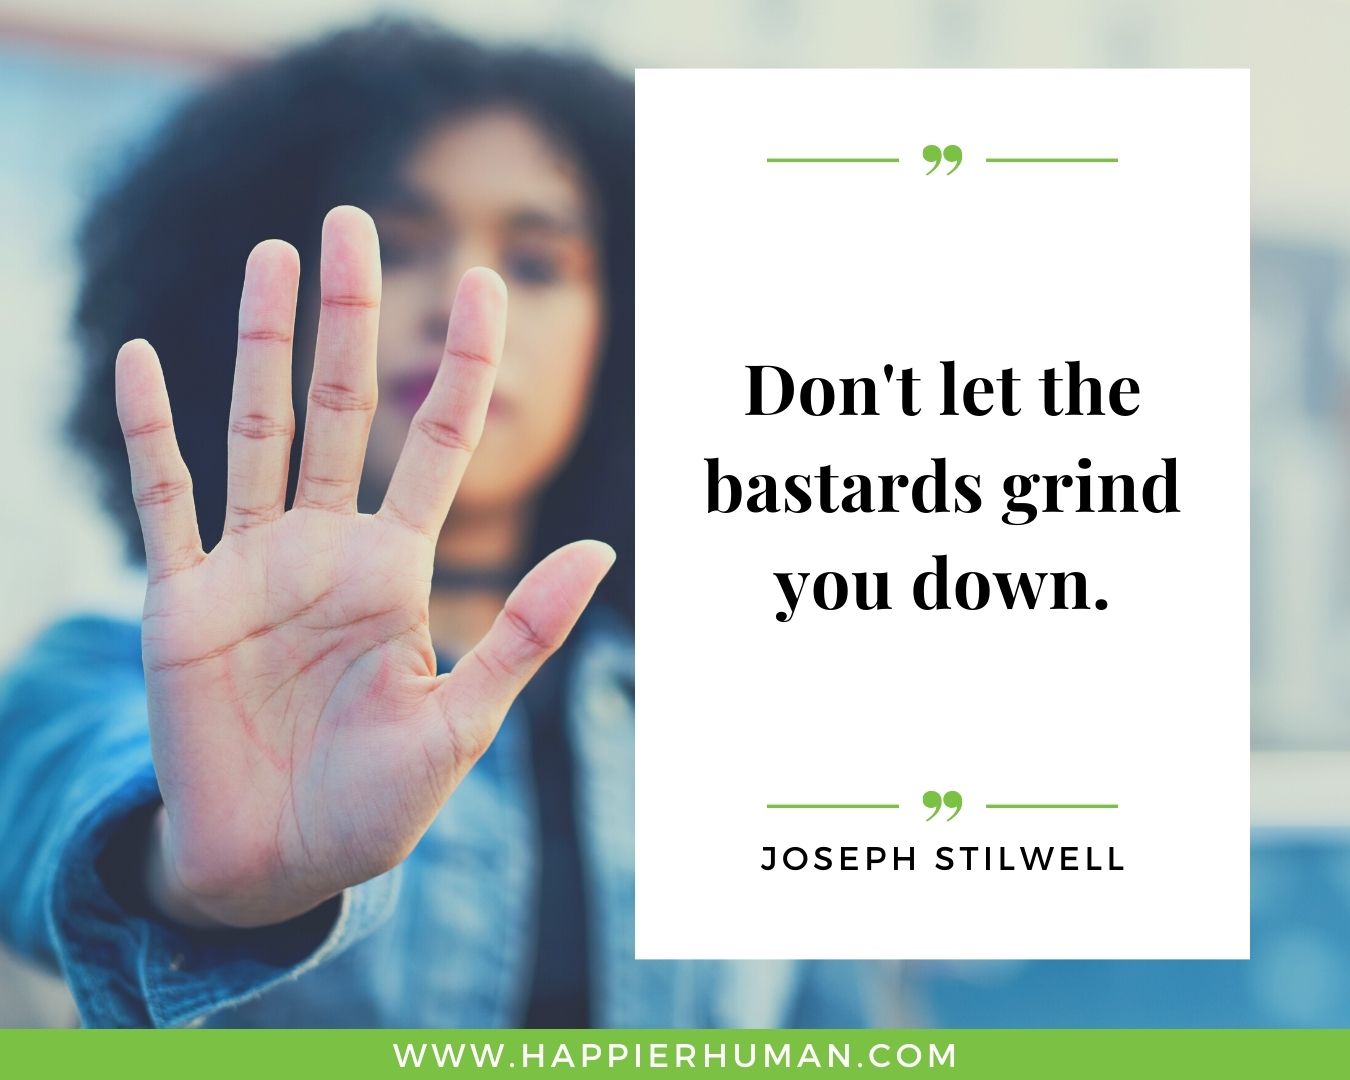 Haters Quotes - "Don't let the bastards grind you down." - Joseph Stilwell